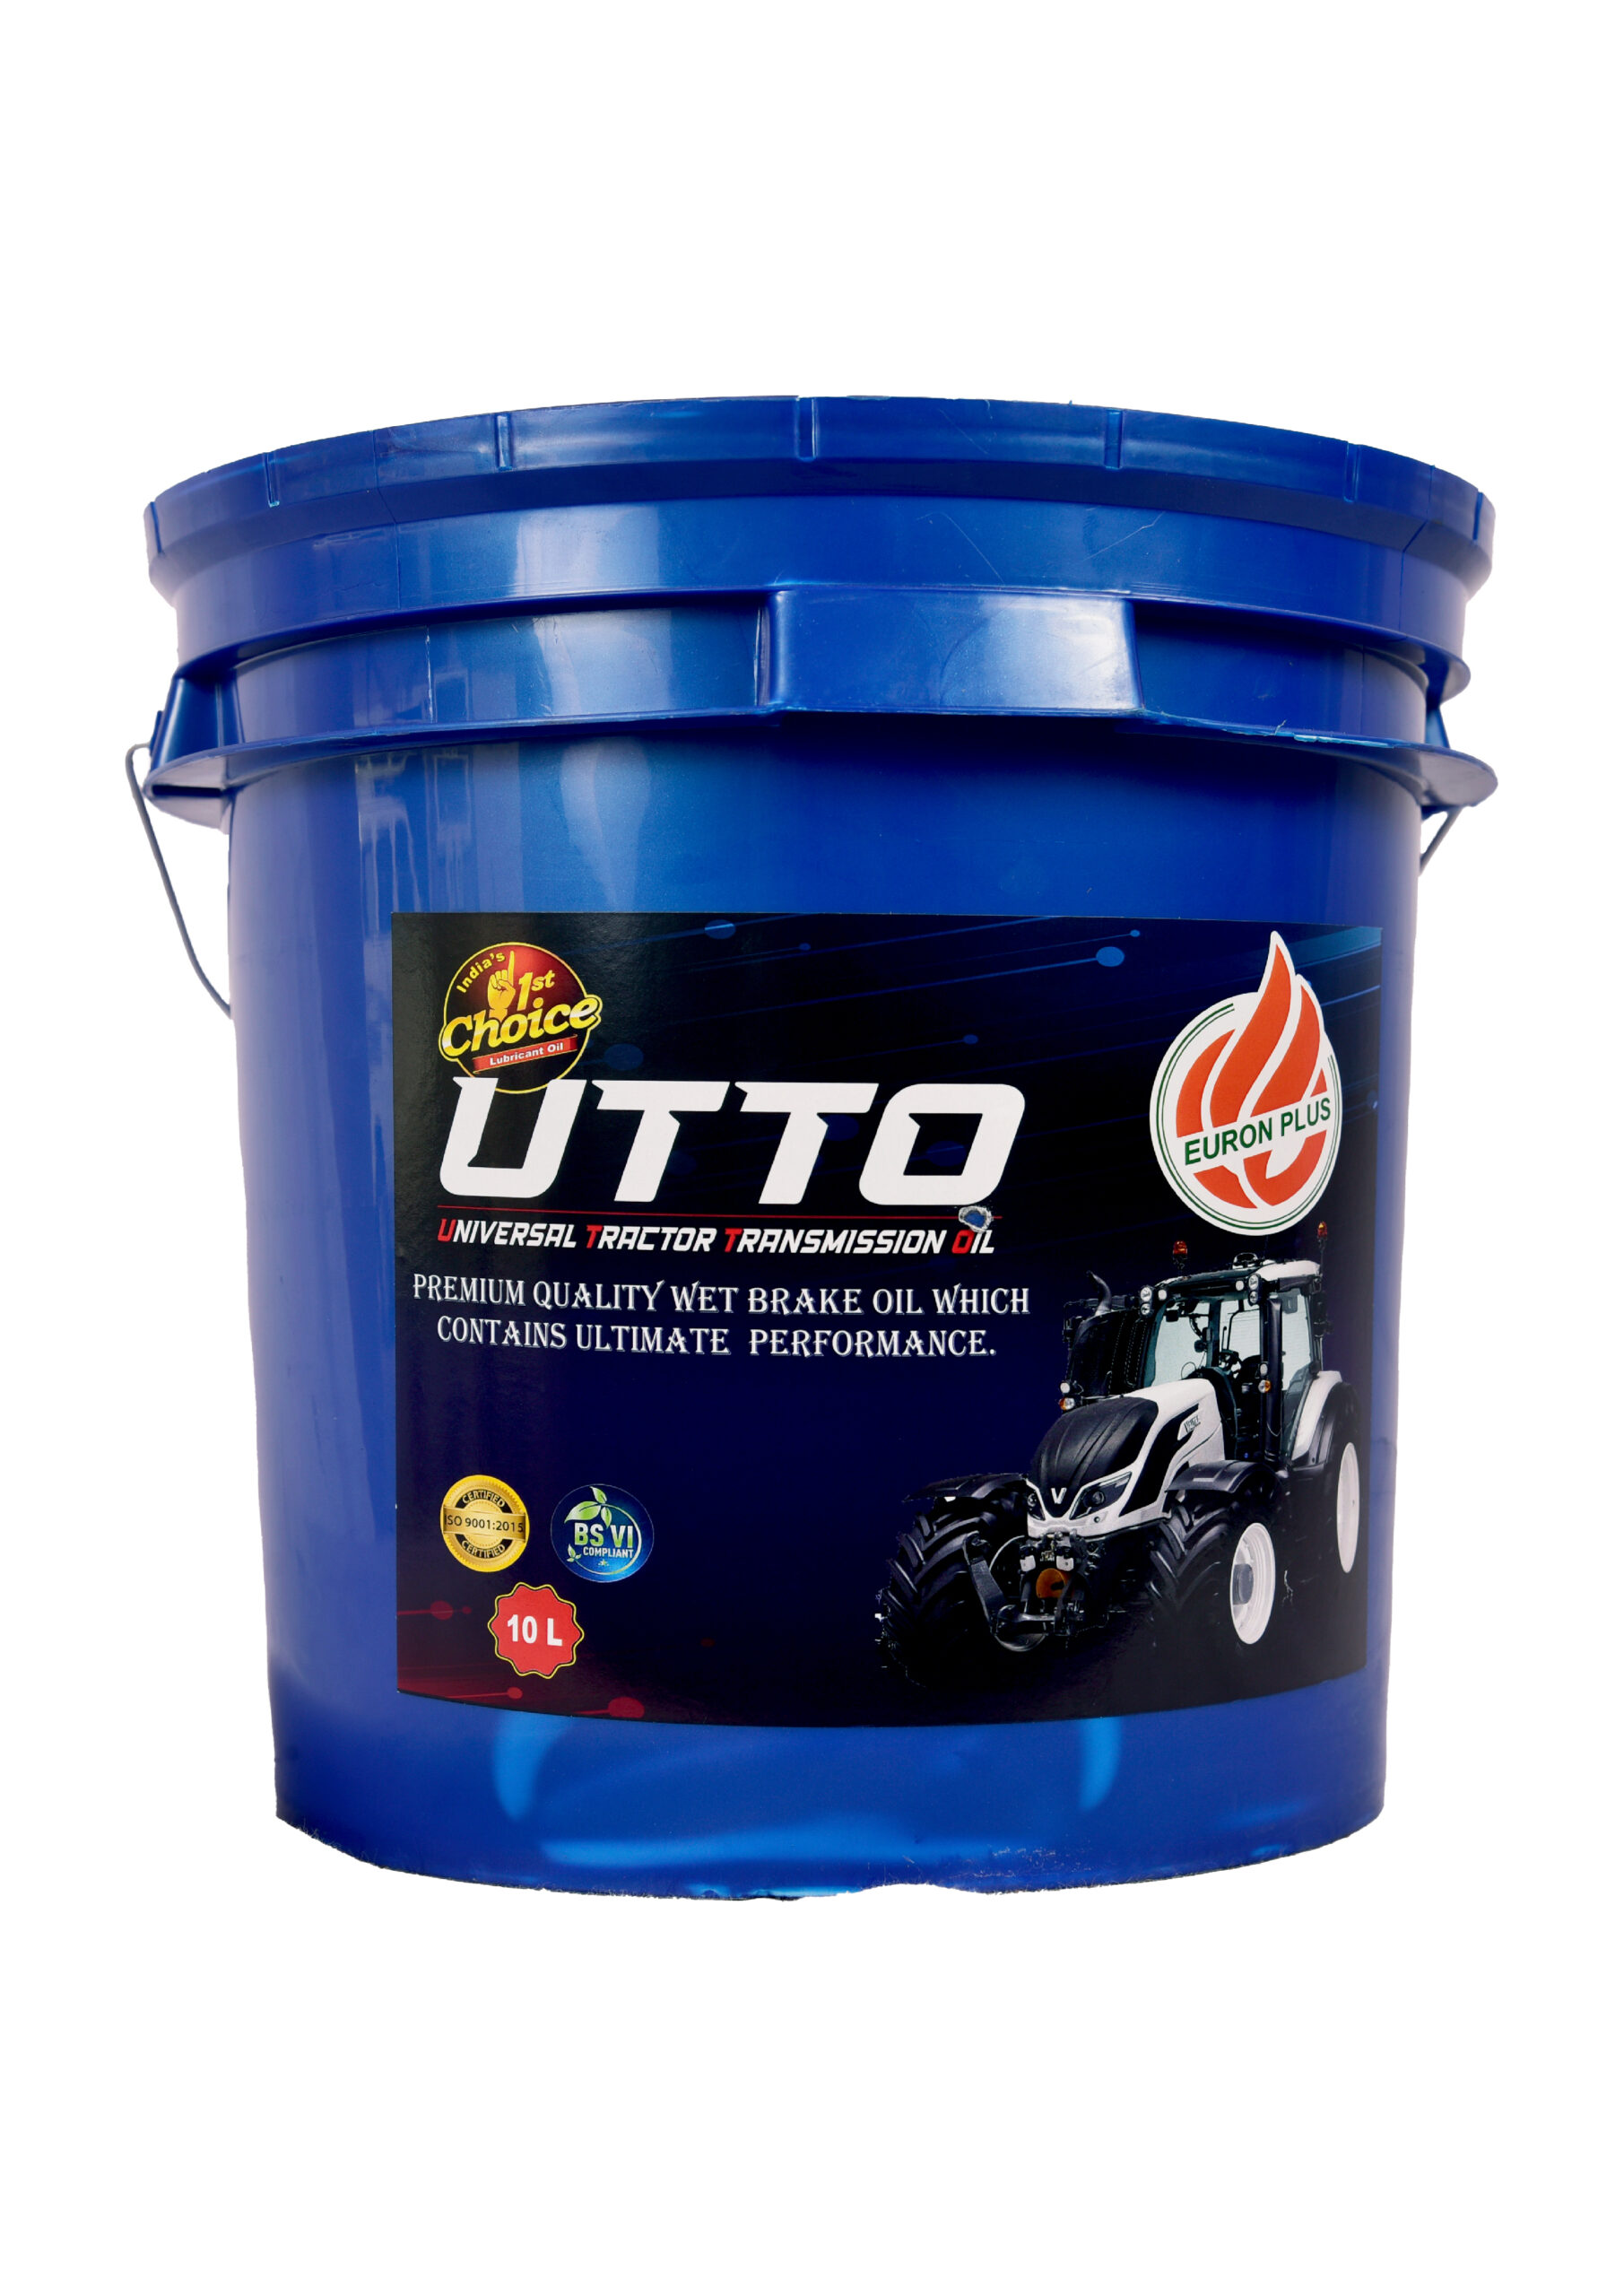 UTTO – UNIVERSAL TRACTOR TRANSMISSION OIL